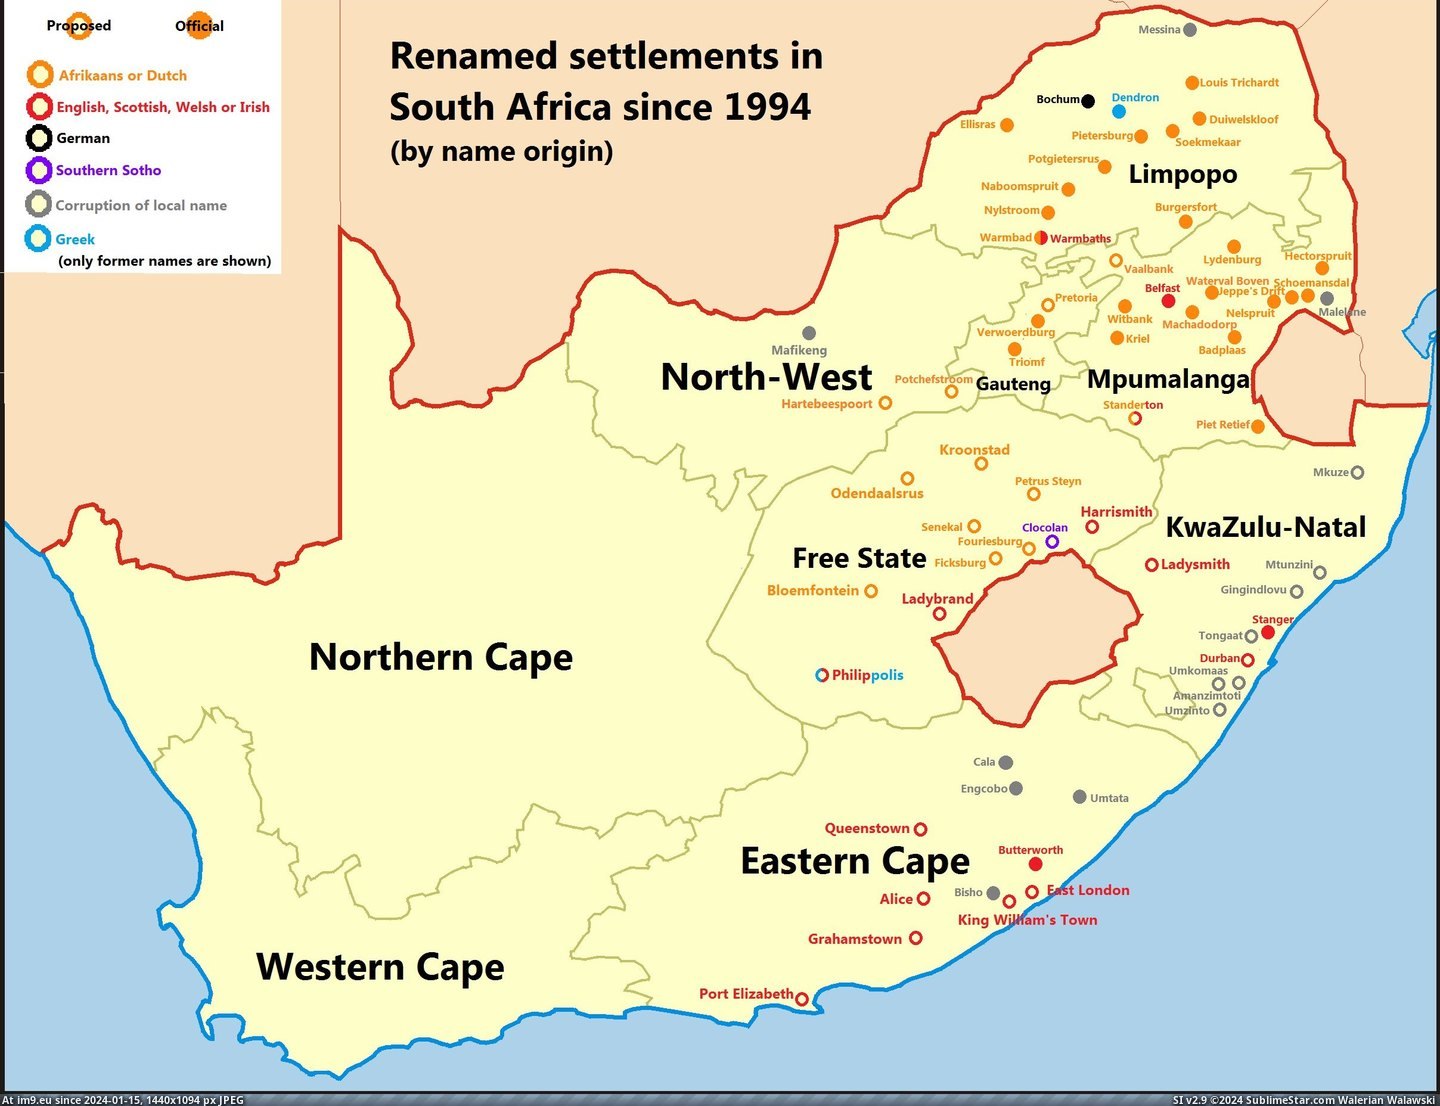 [Mapporn] Renamed settlements in South Africa since 1994 [2416x1848] (in My r/MAPS favs)